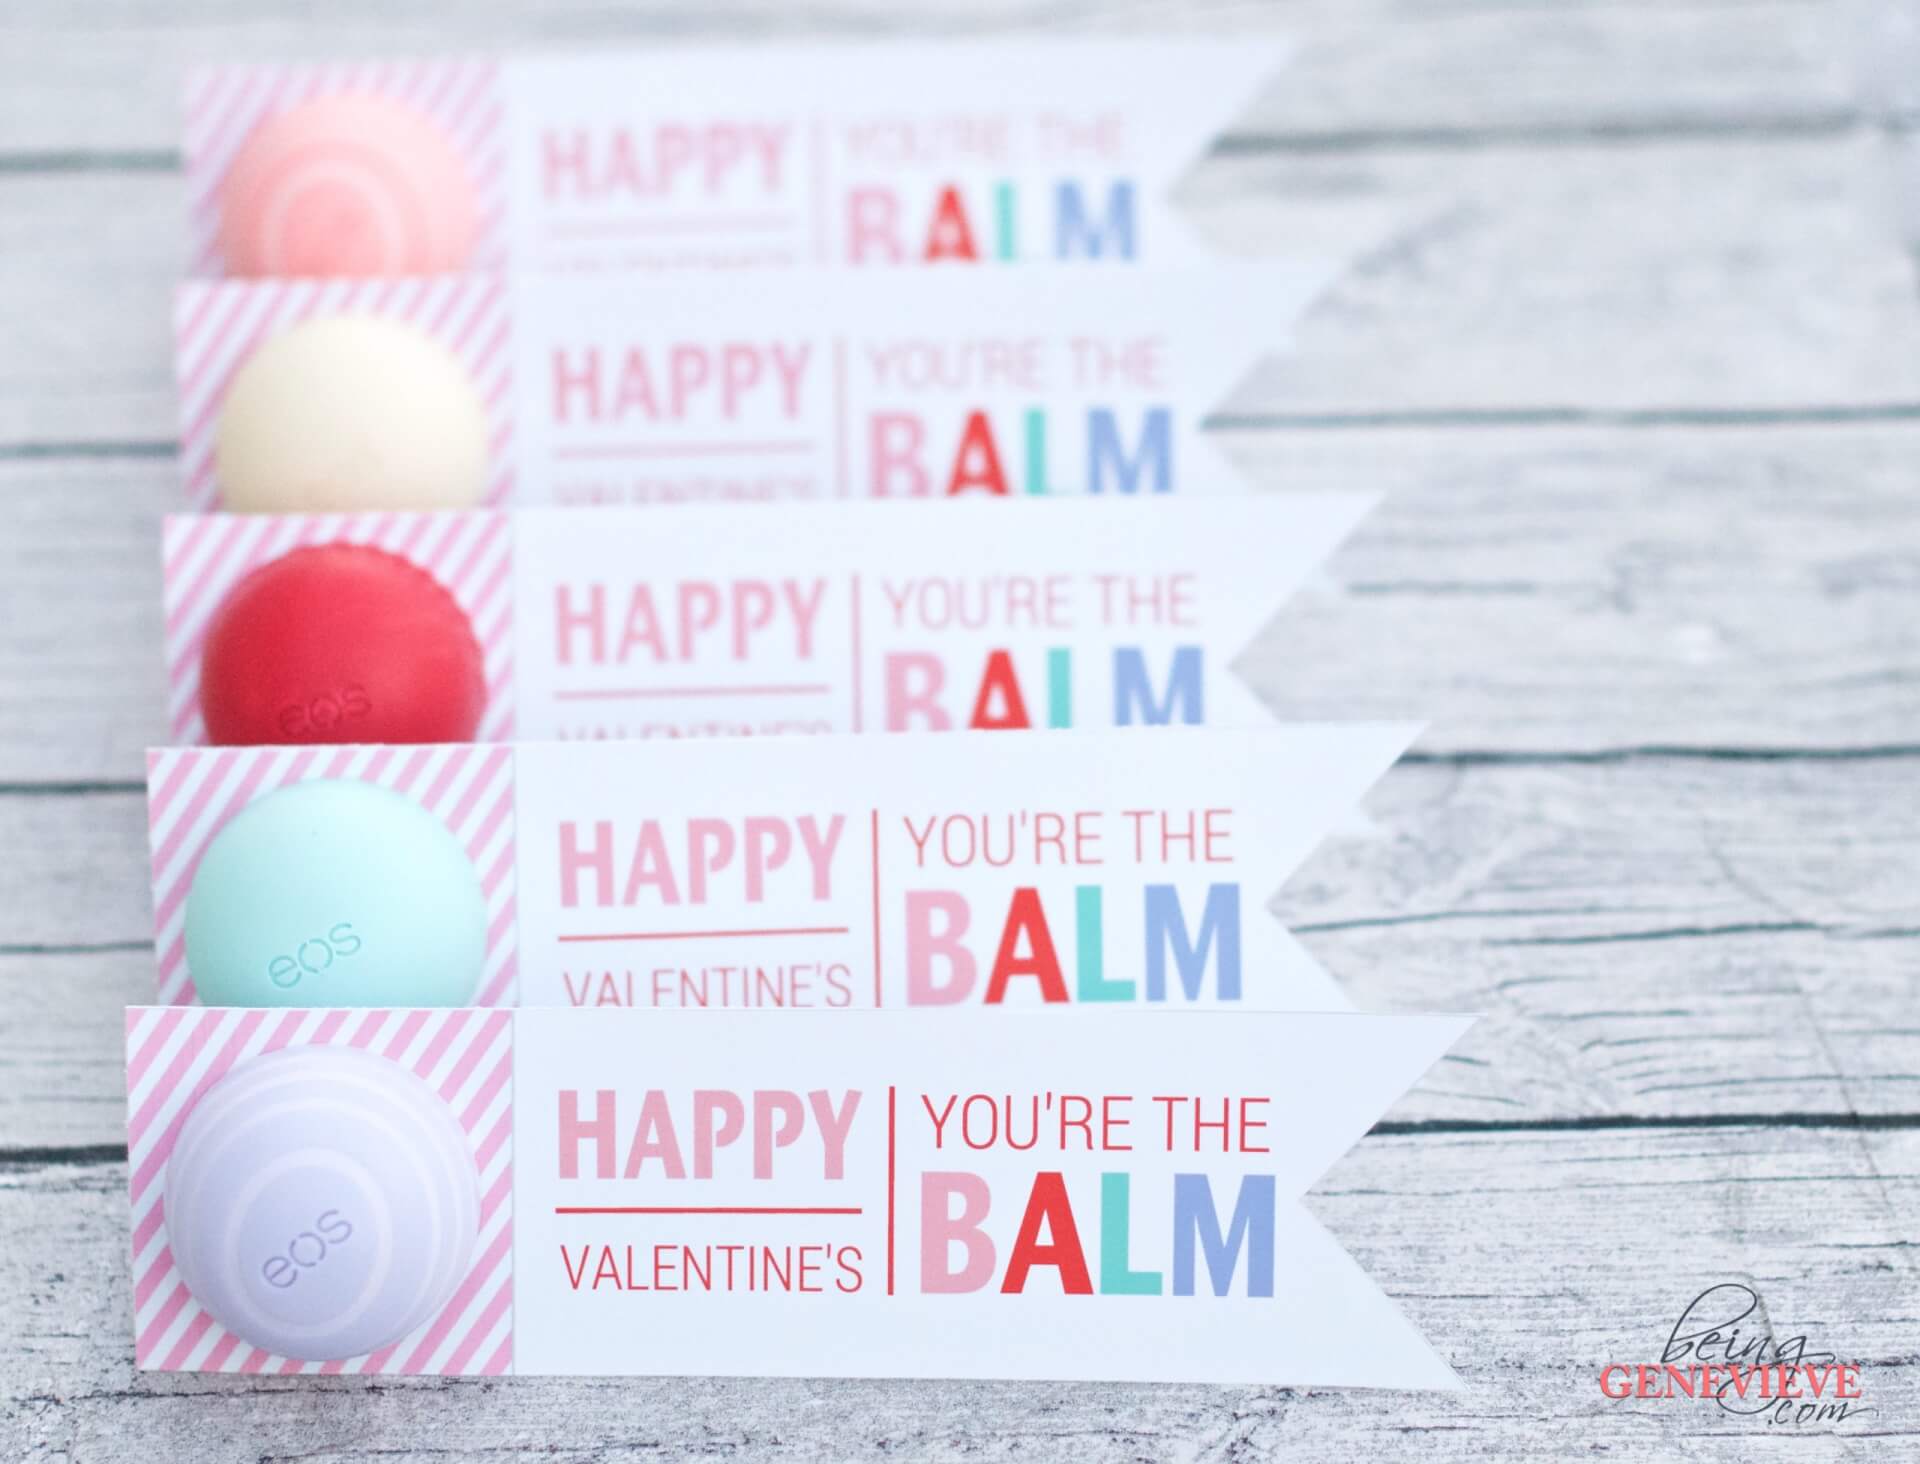 You’re The Balm Valentine